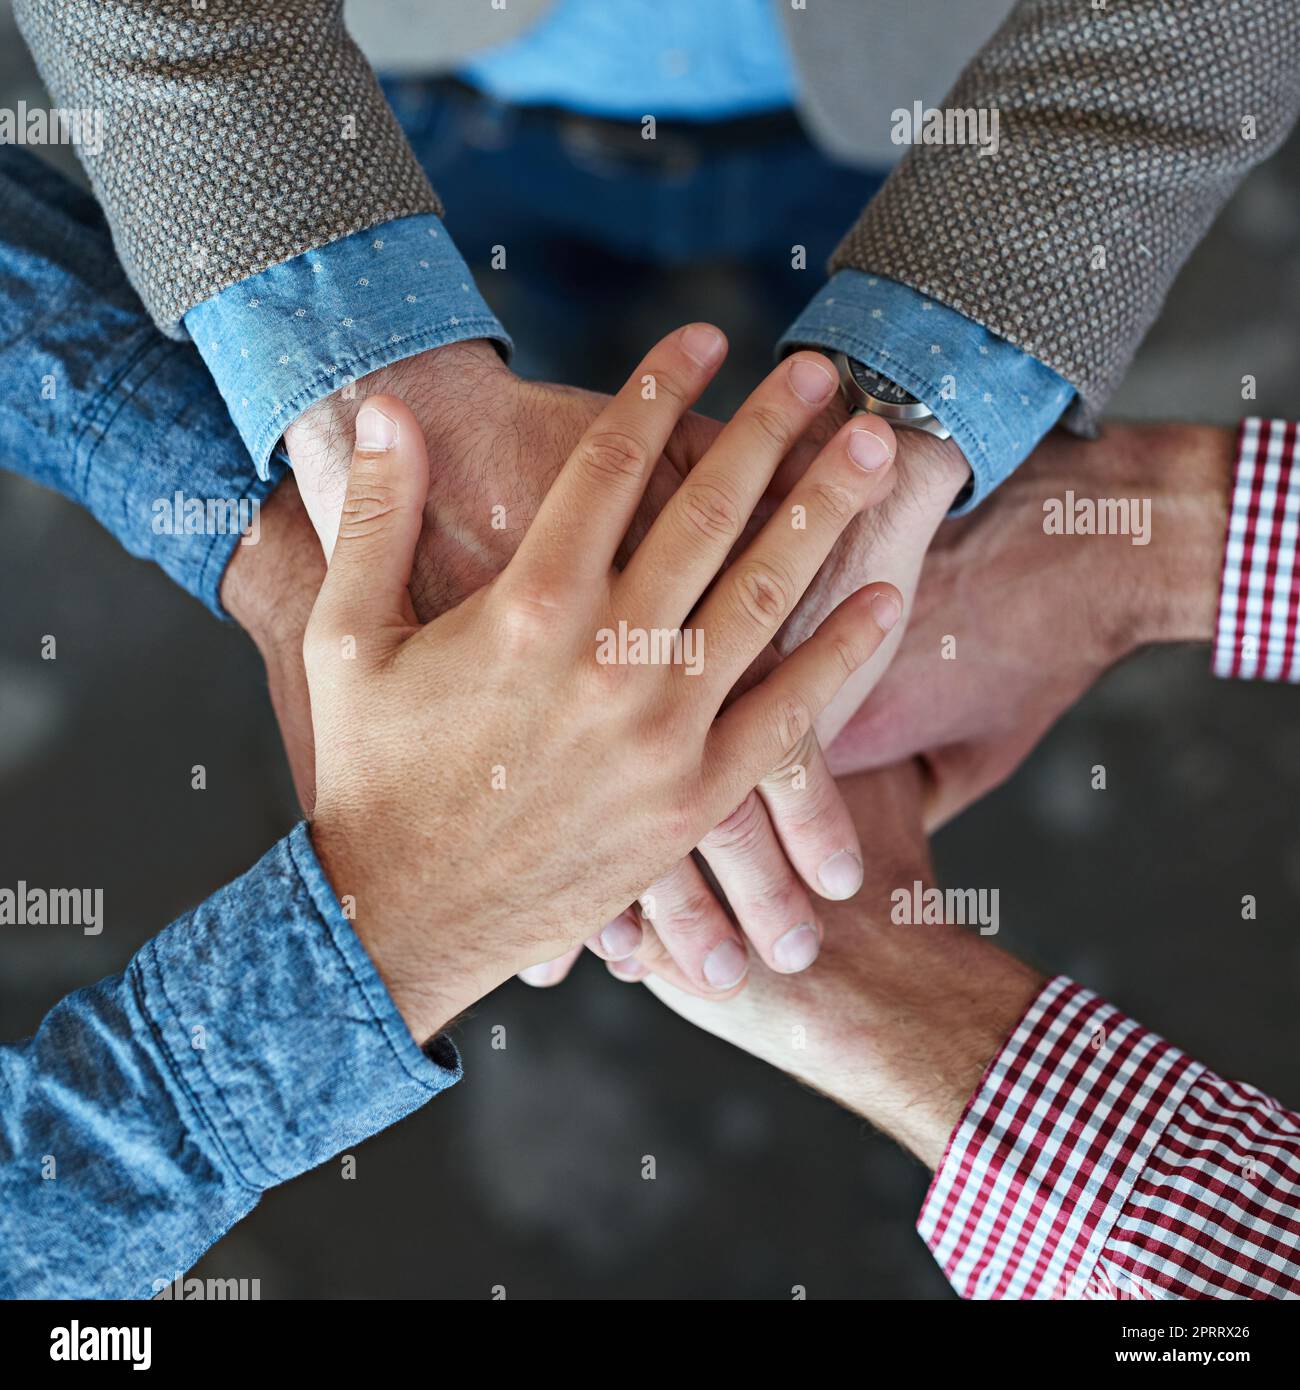 All for one. Top view of co-workers hand put together in an expression of unity and team spirit. Stock Photo